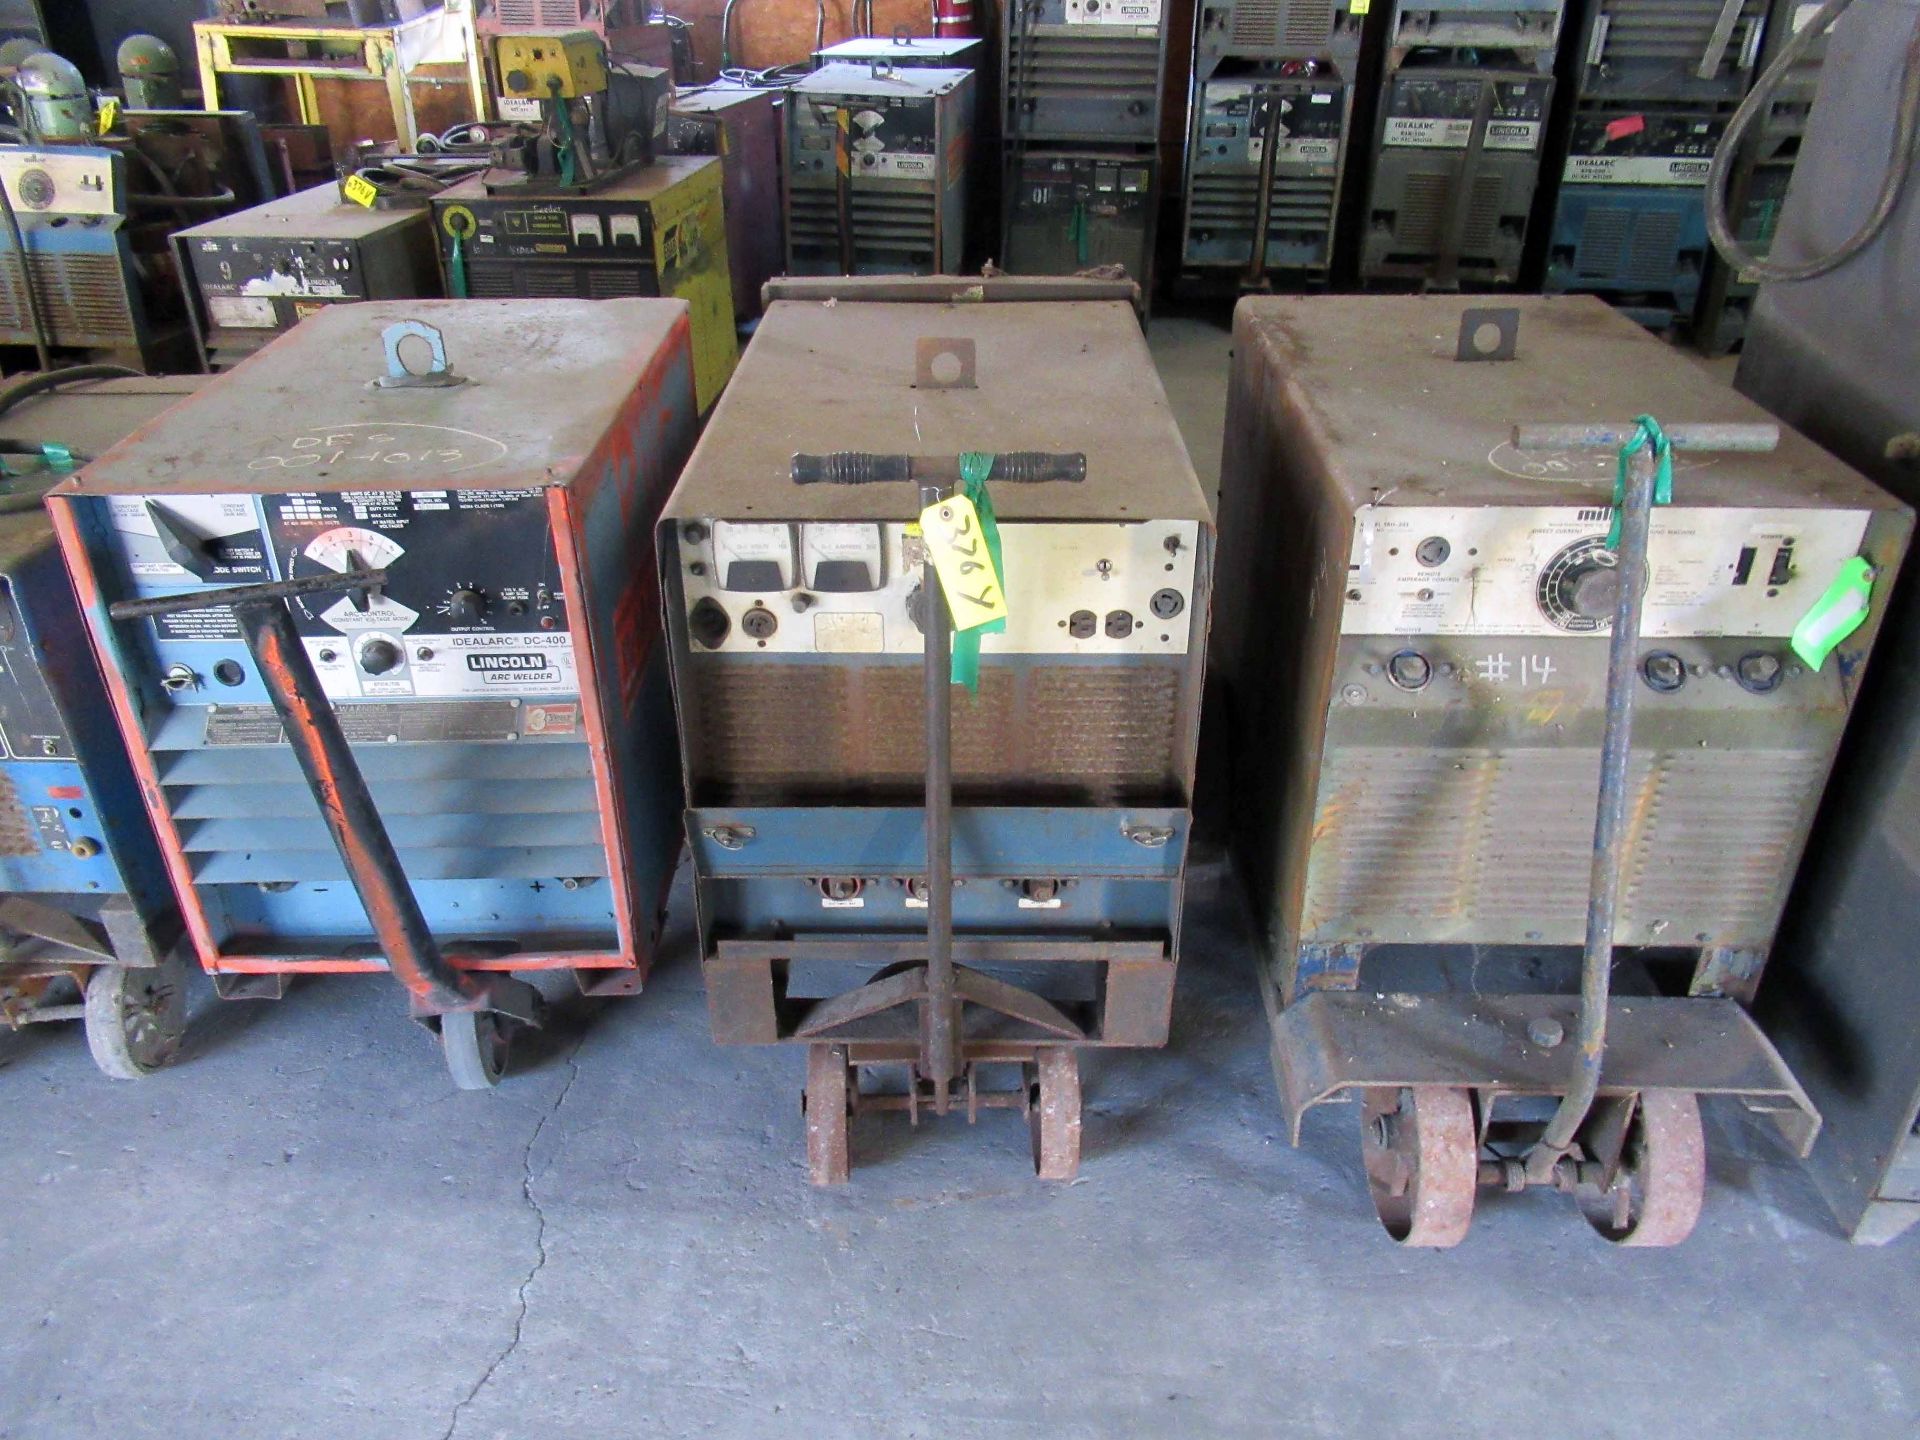 LOT OF WELDERS (3): (1) Lincoln Idealarc DC-400, (1) Lincoln Idealarc SRH-333 & (1) Lincoln (N/A) (